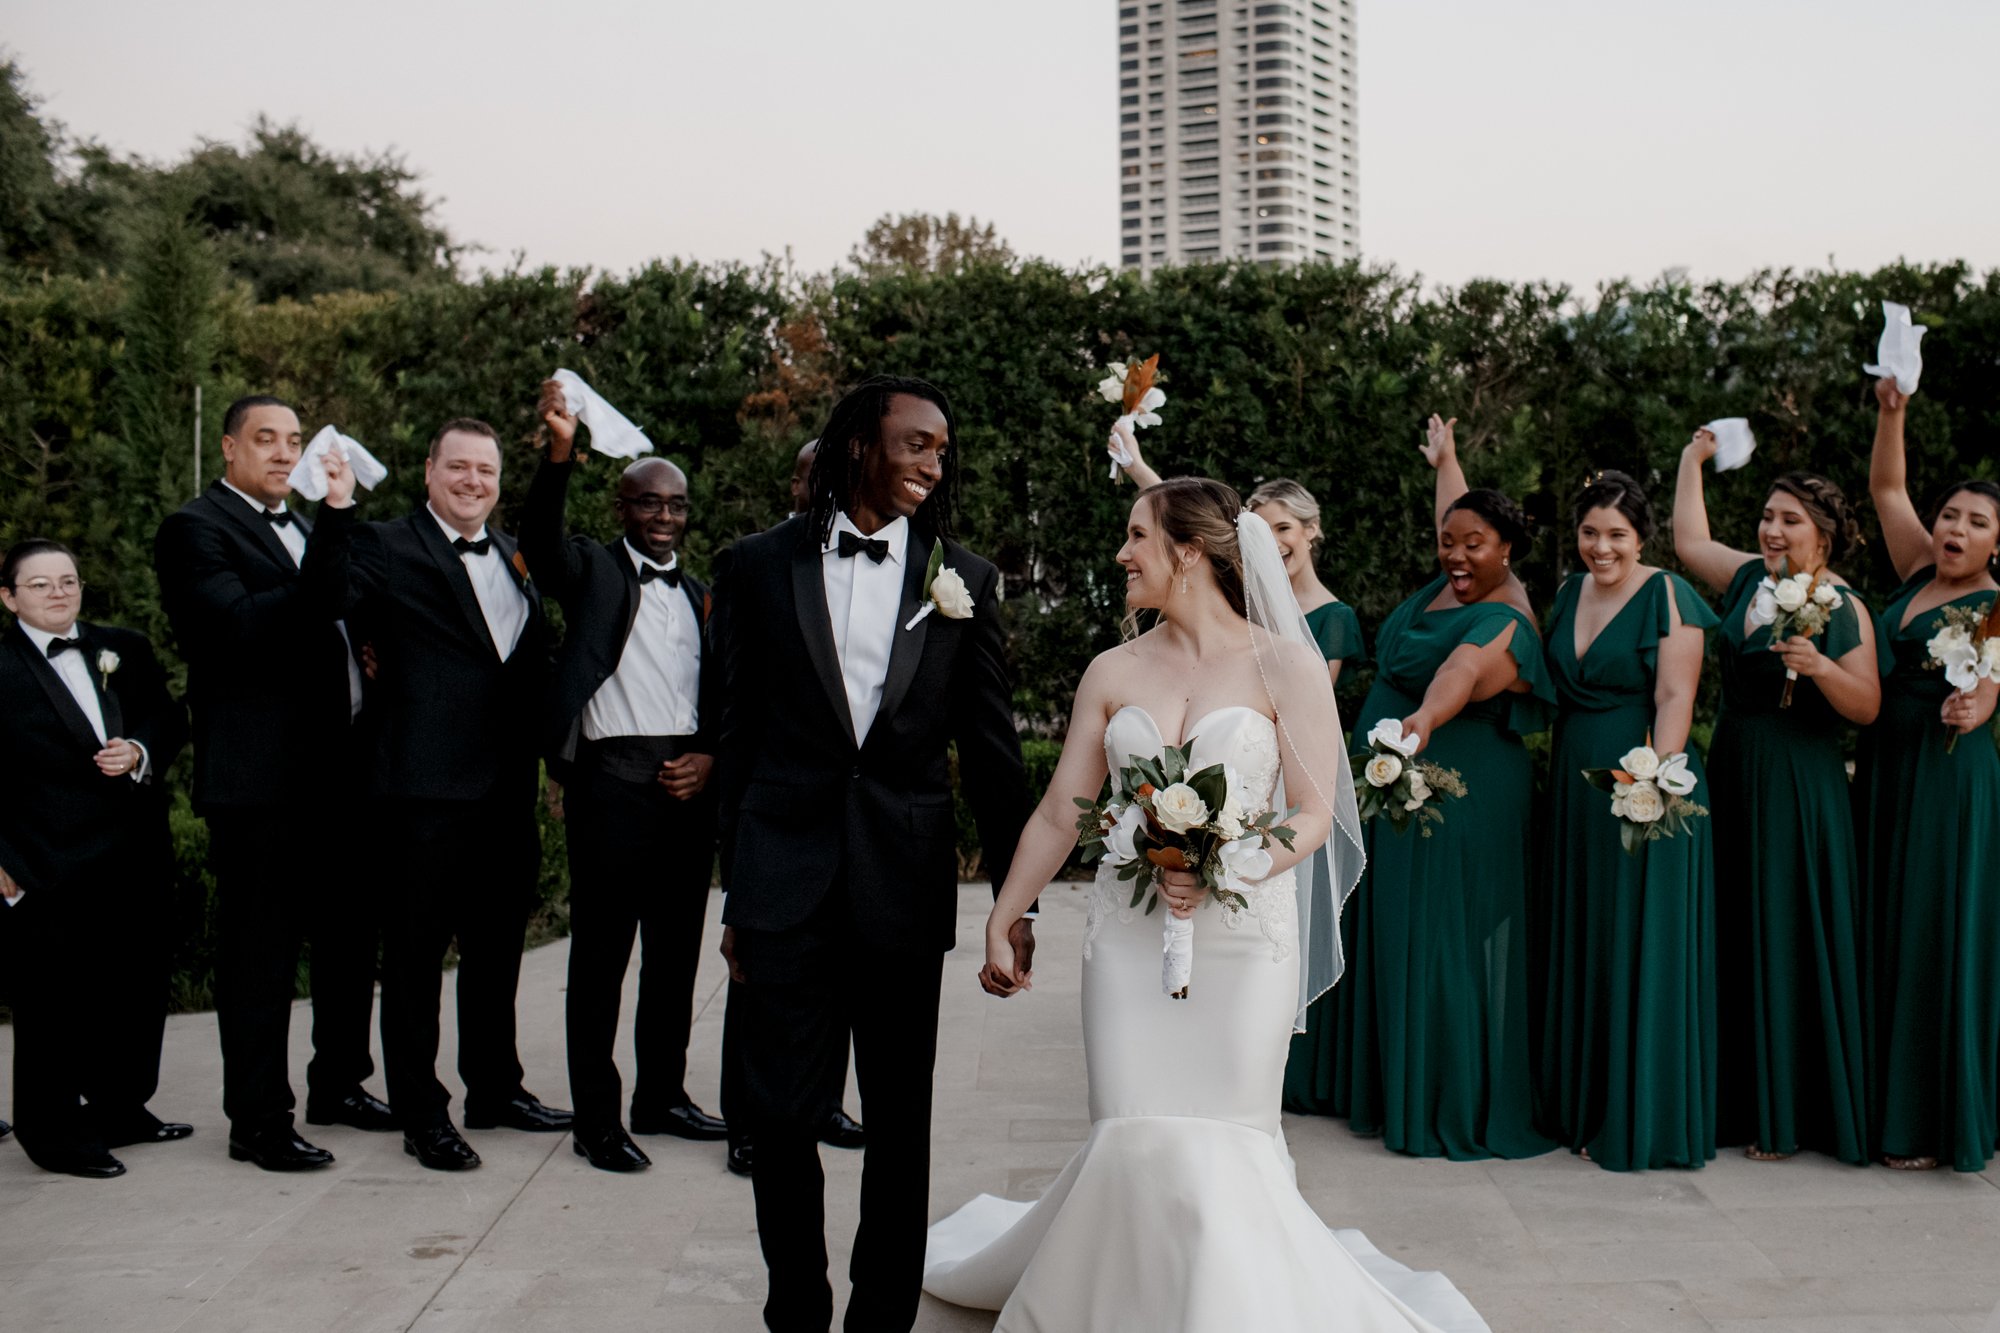 Bride and groom with bridal party. New Orleans Style Wedding at McGovern Centennial Gardens (Houston, TX)